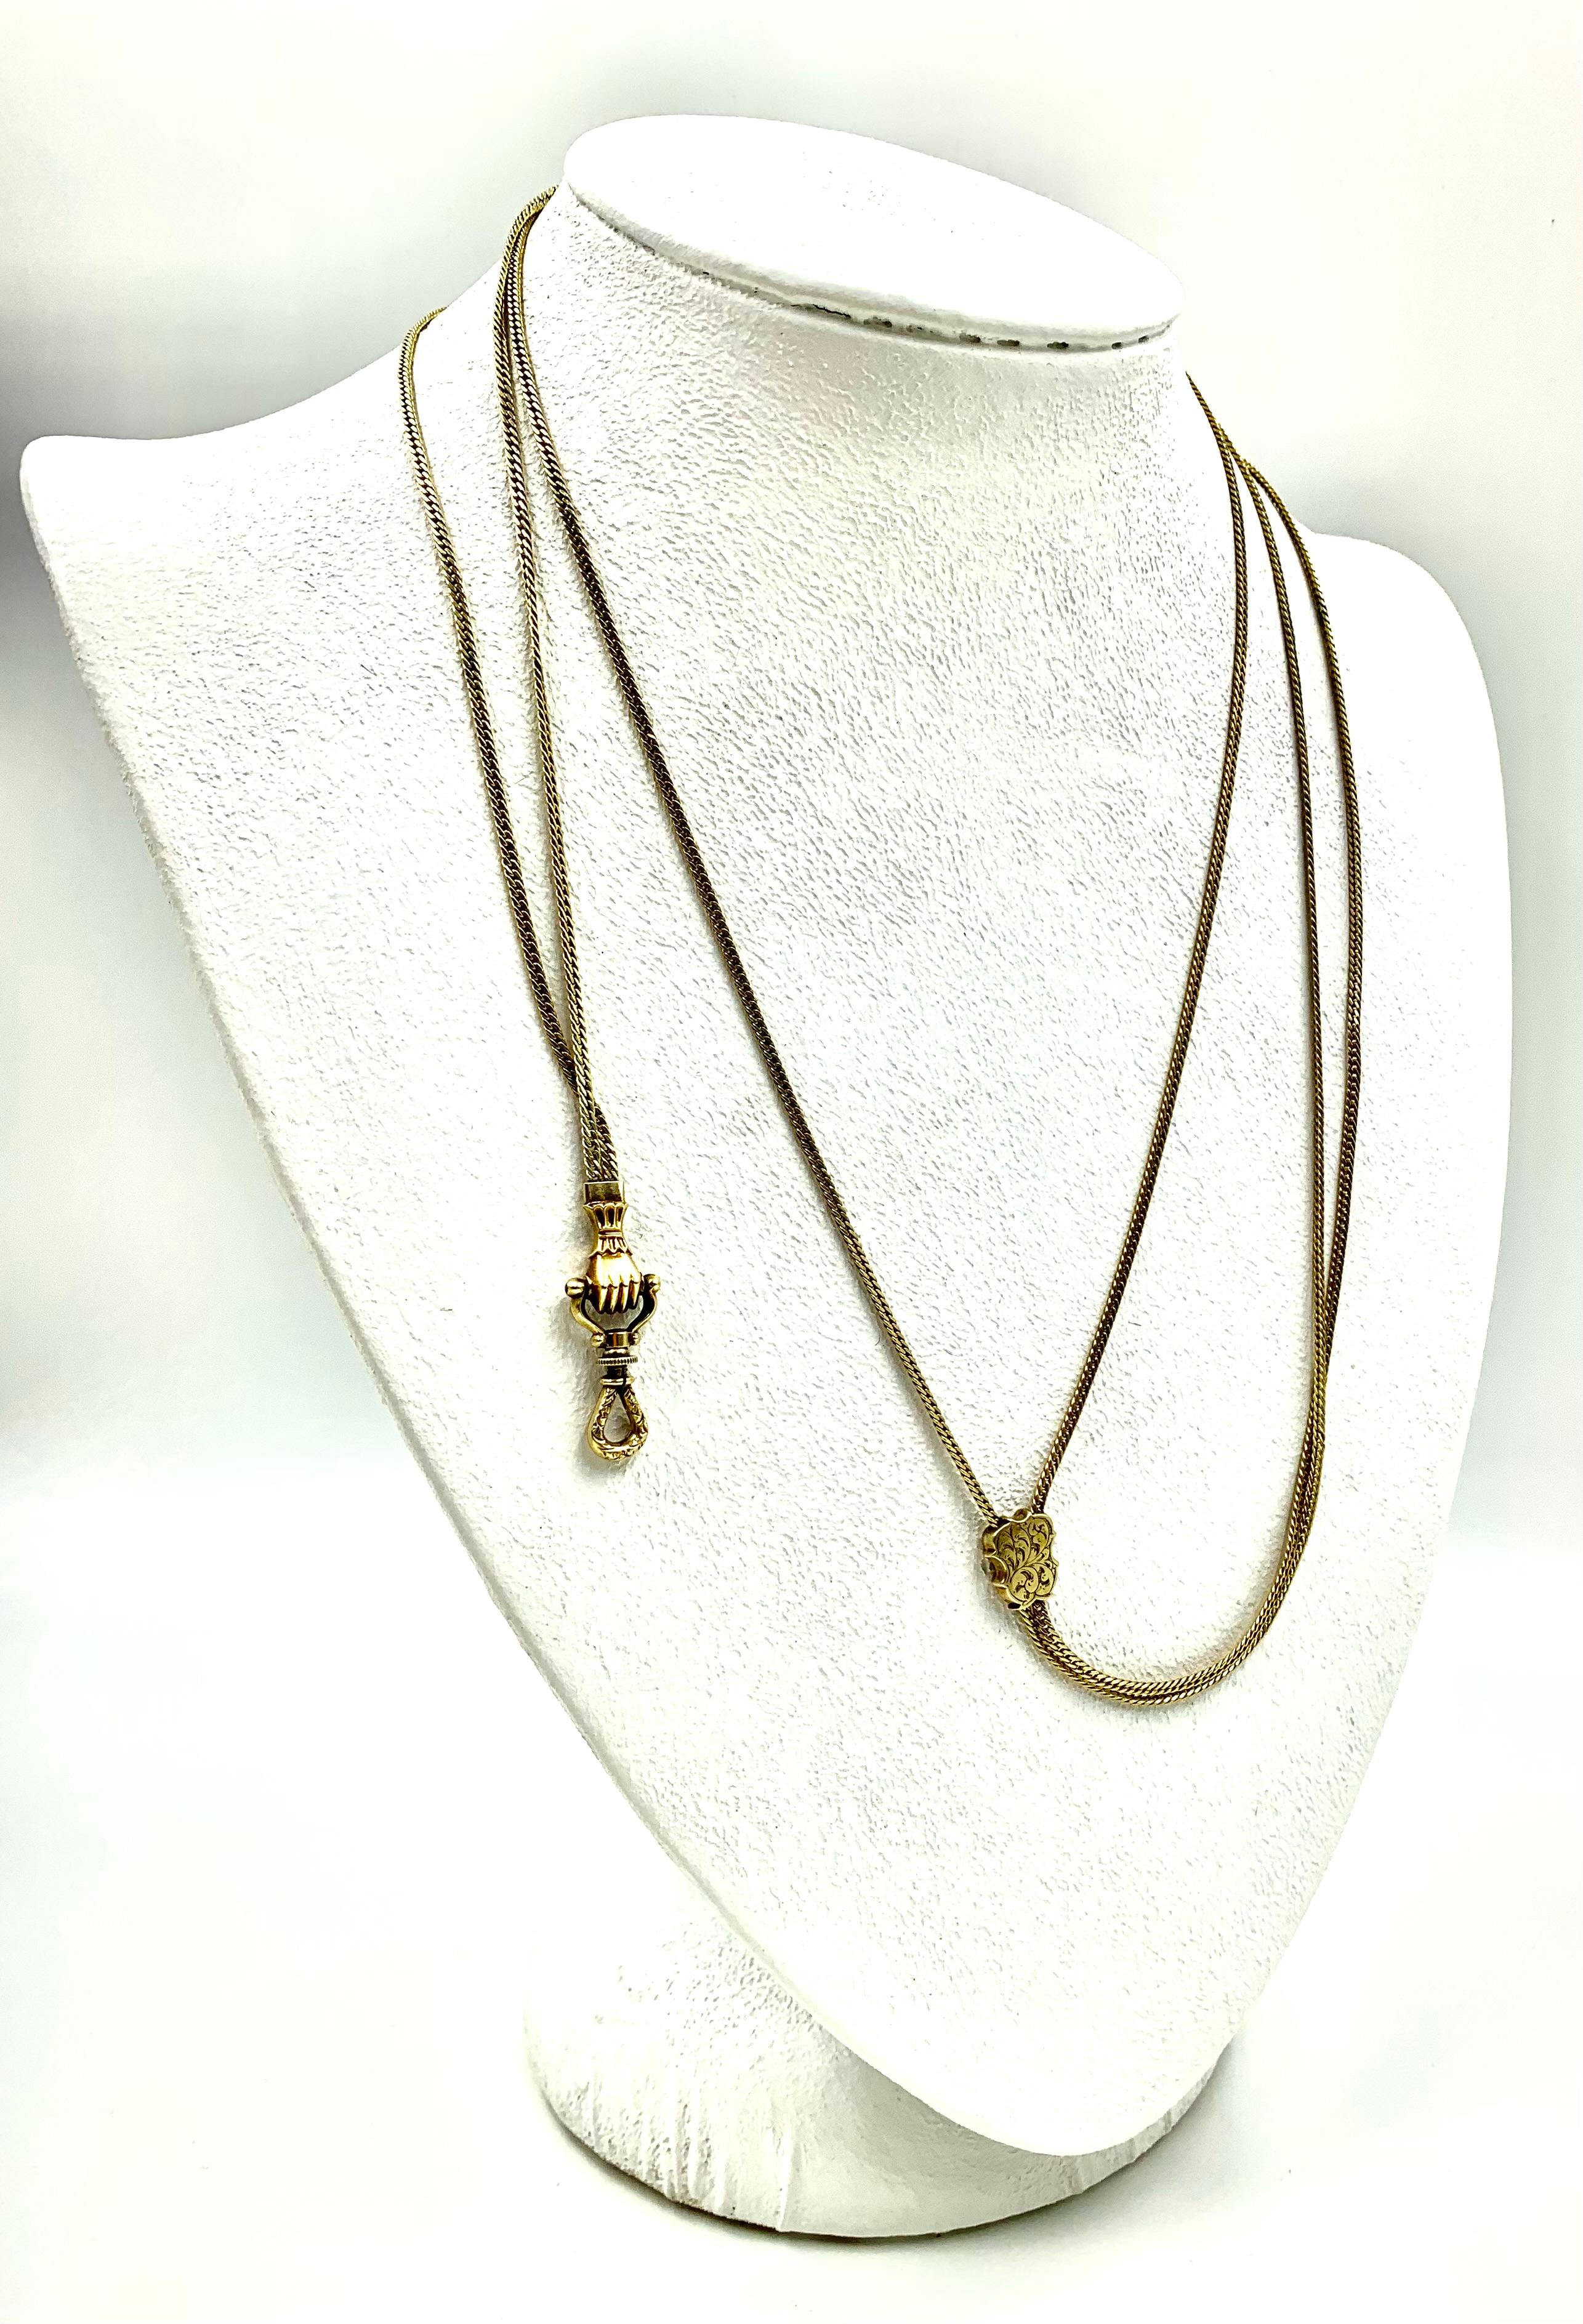 Women's or Men's Exceptionally Long Antique 18K Gold Mano Sautoir Slide Chain Necklace Circa 1840 For Sale